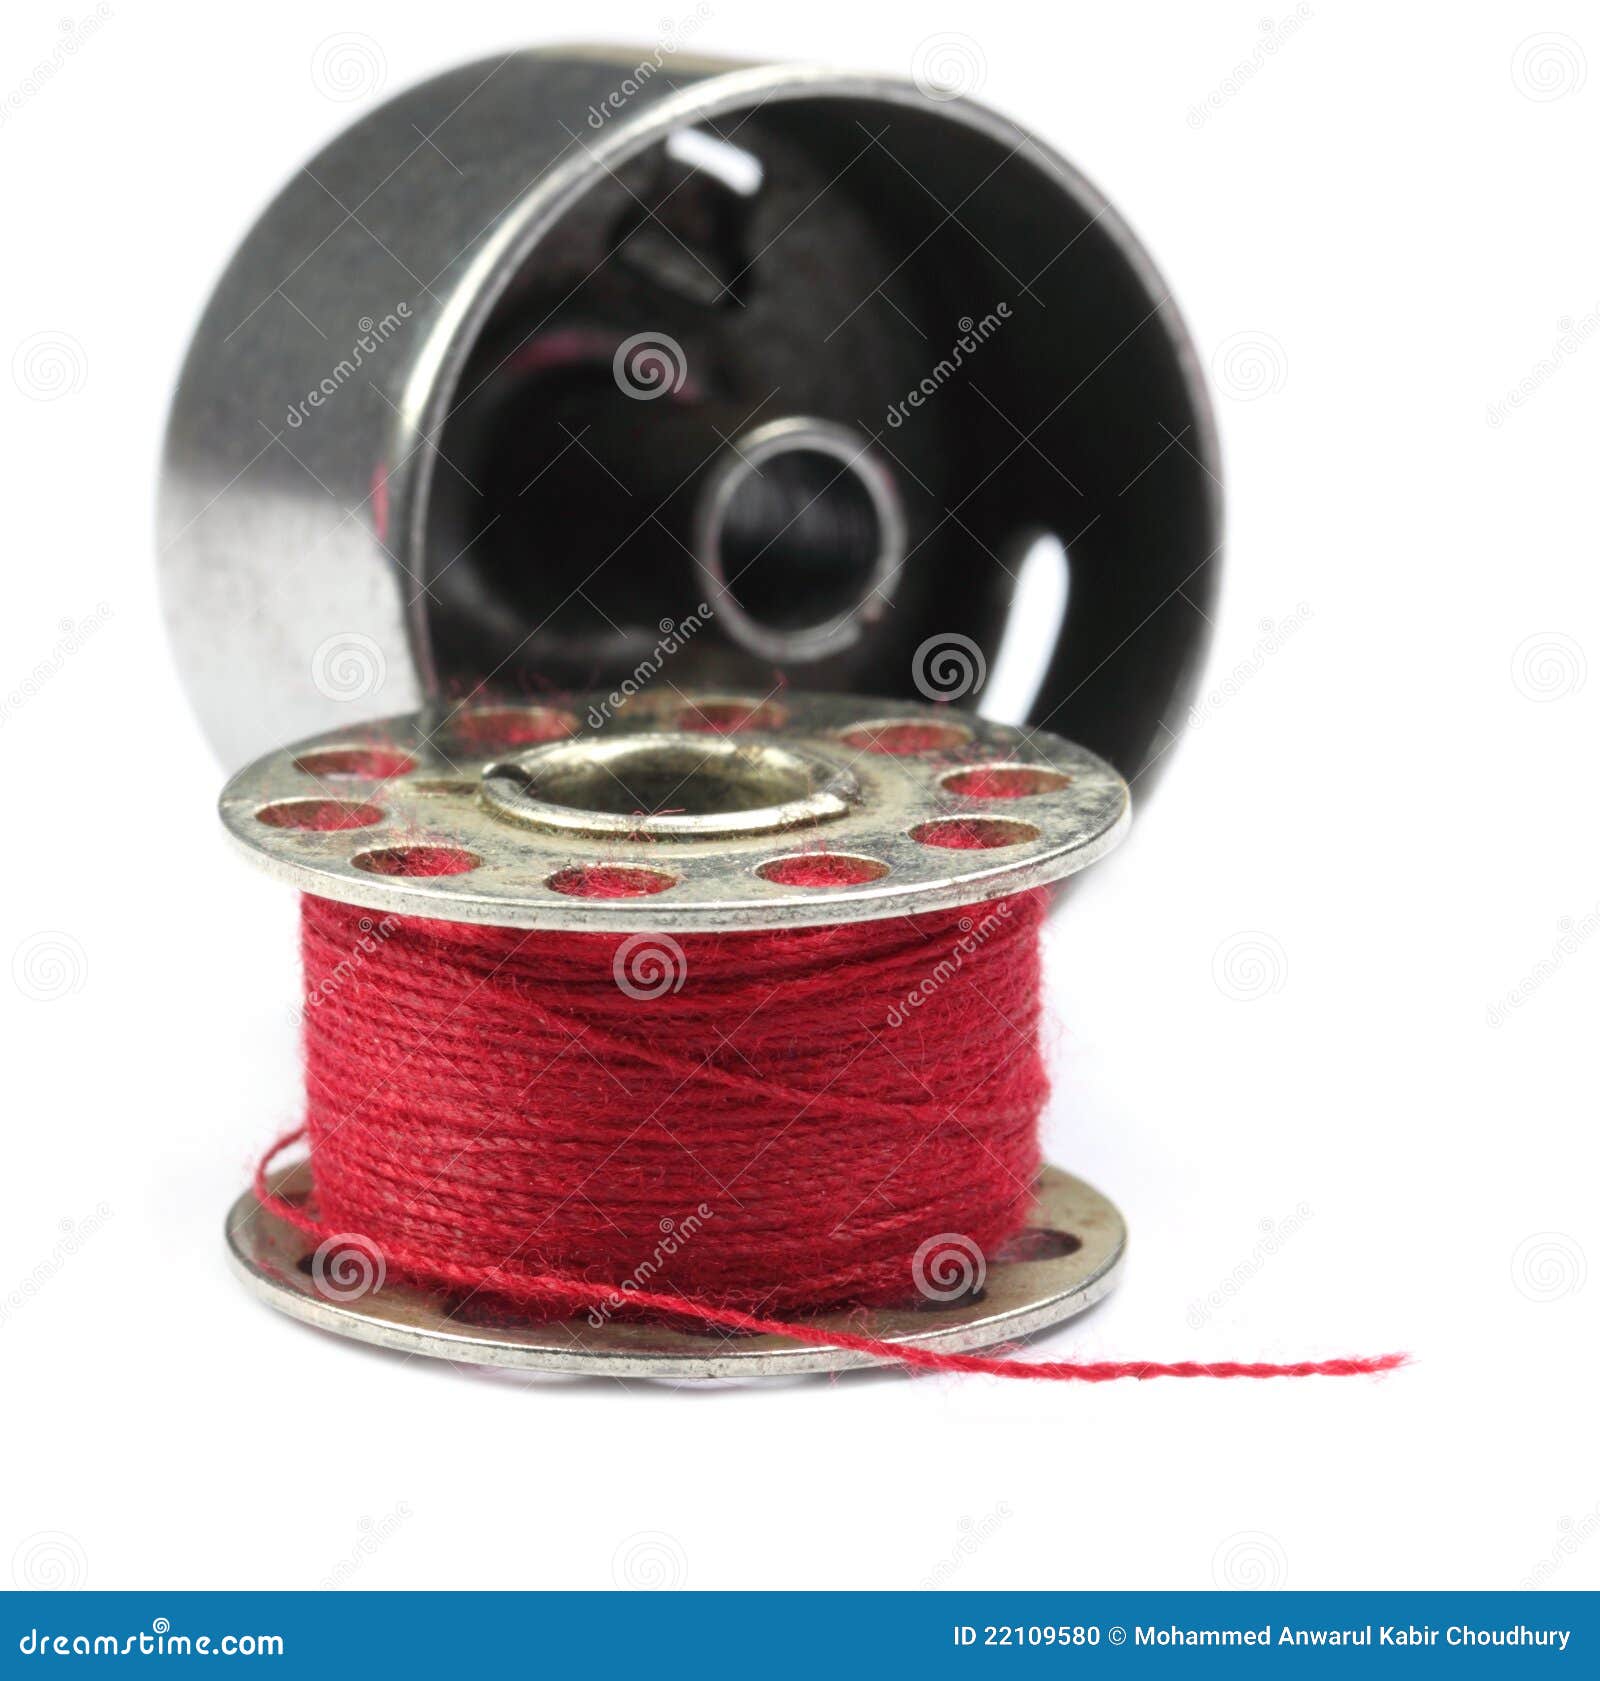 131,121 Bobbin Royalty-Free Images, Stock Photos & Pictures